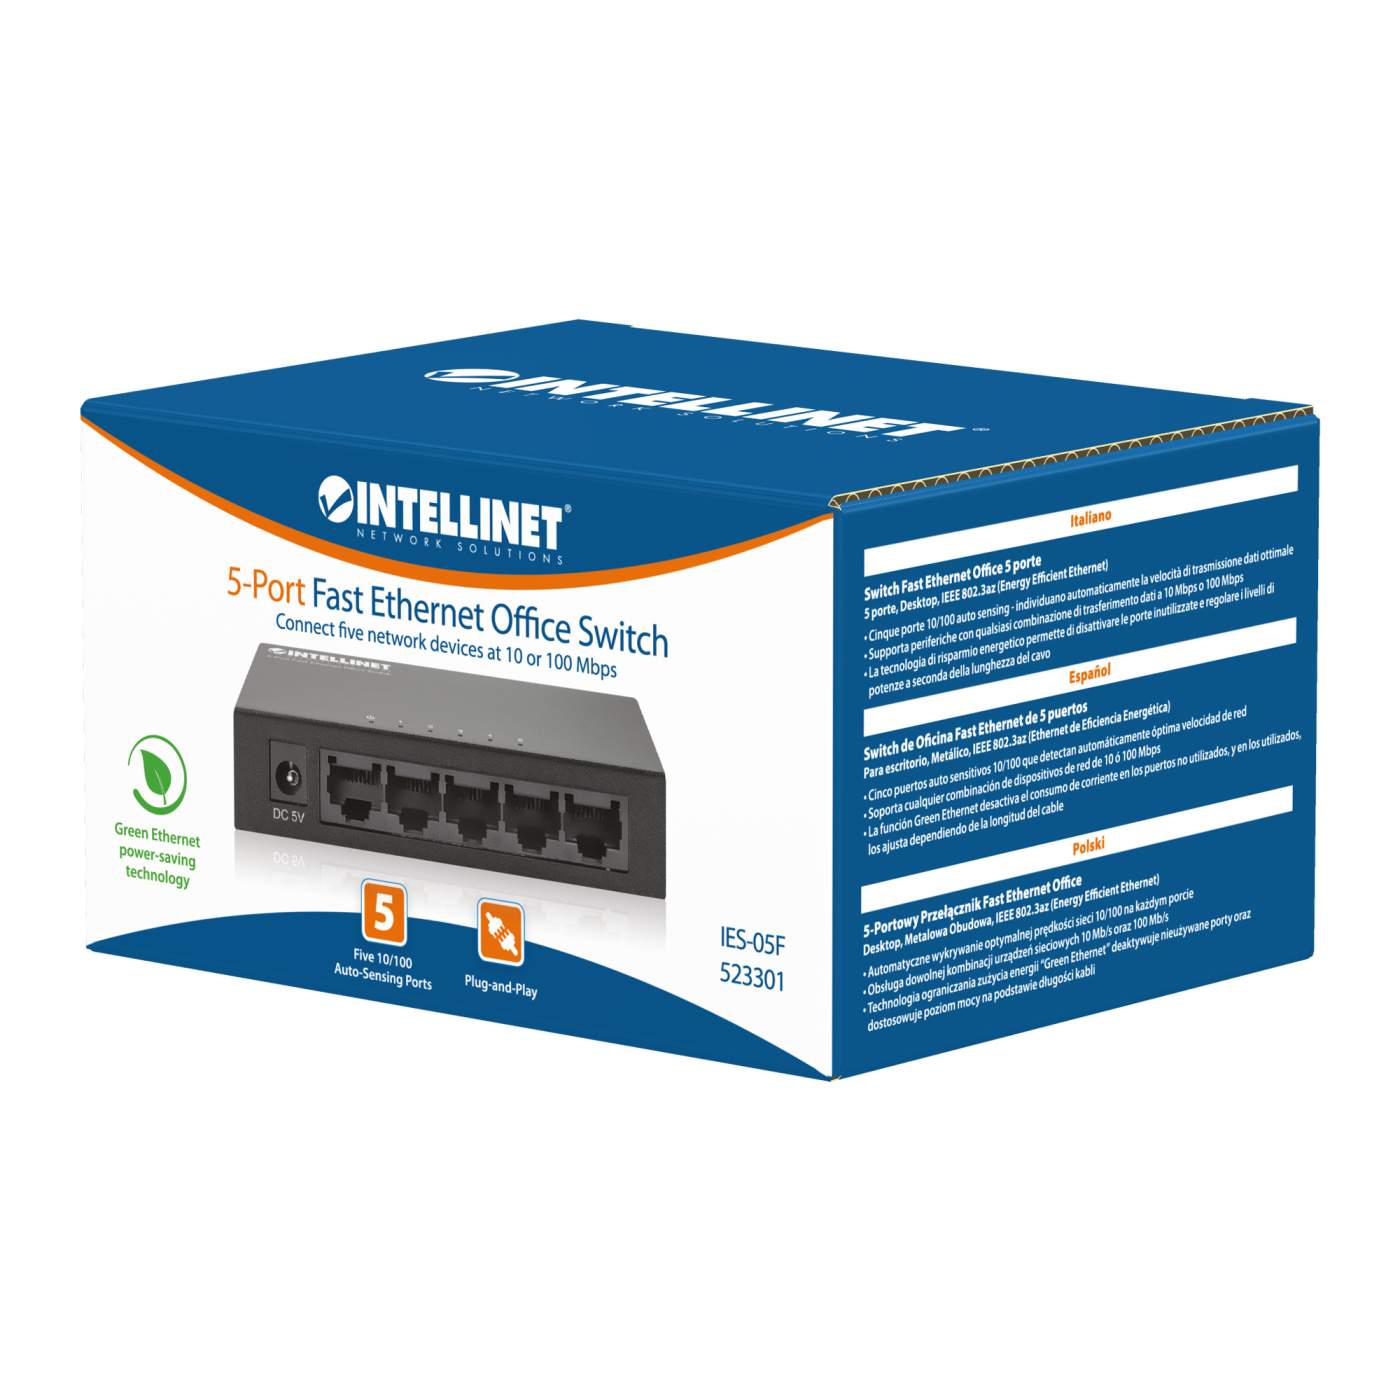 5-Port Fast Ethernet Office Switch Packaging Image 2